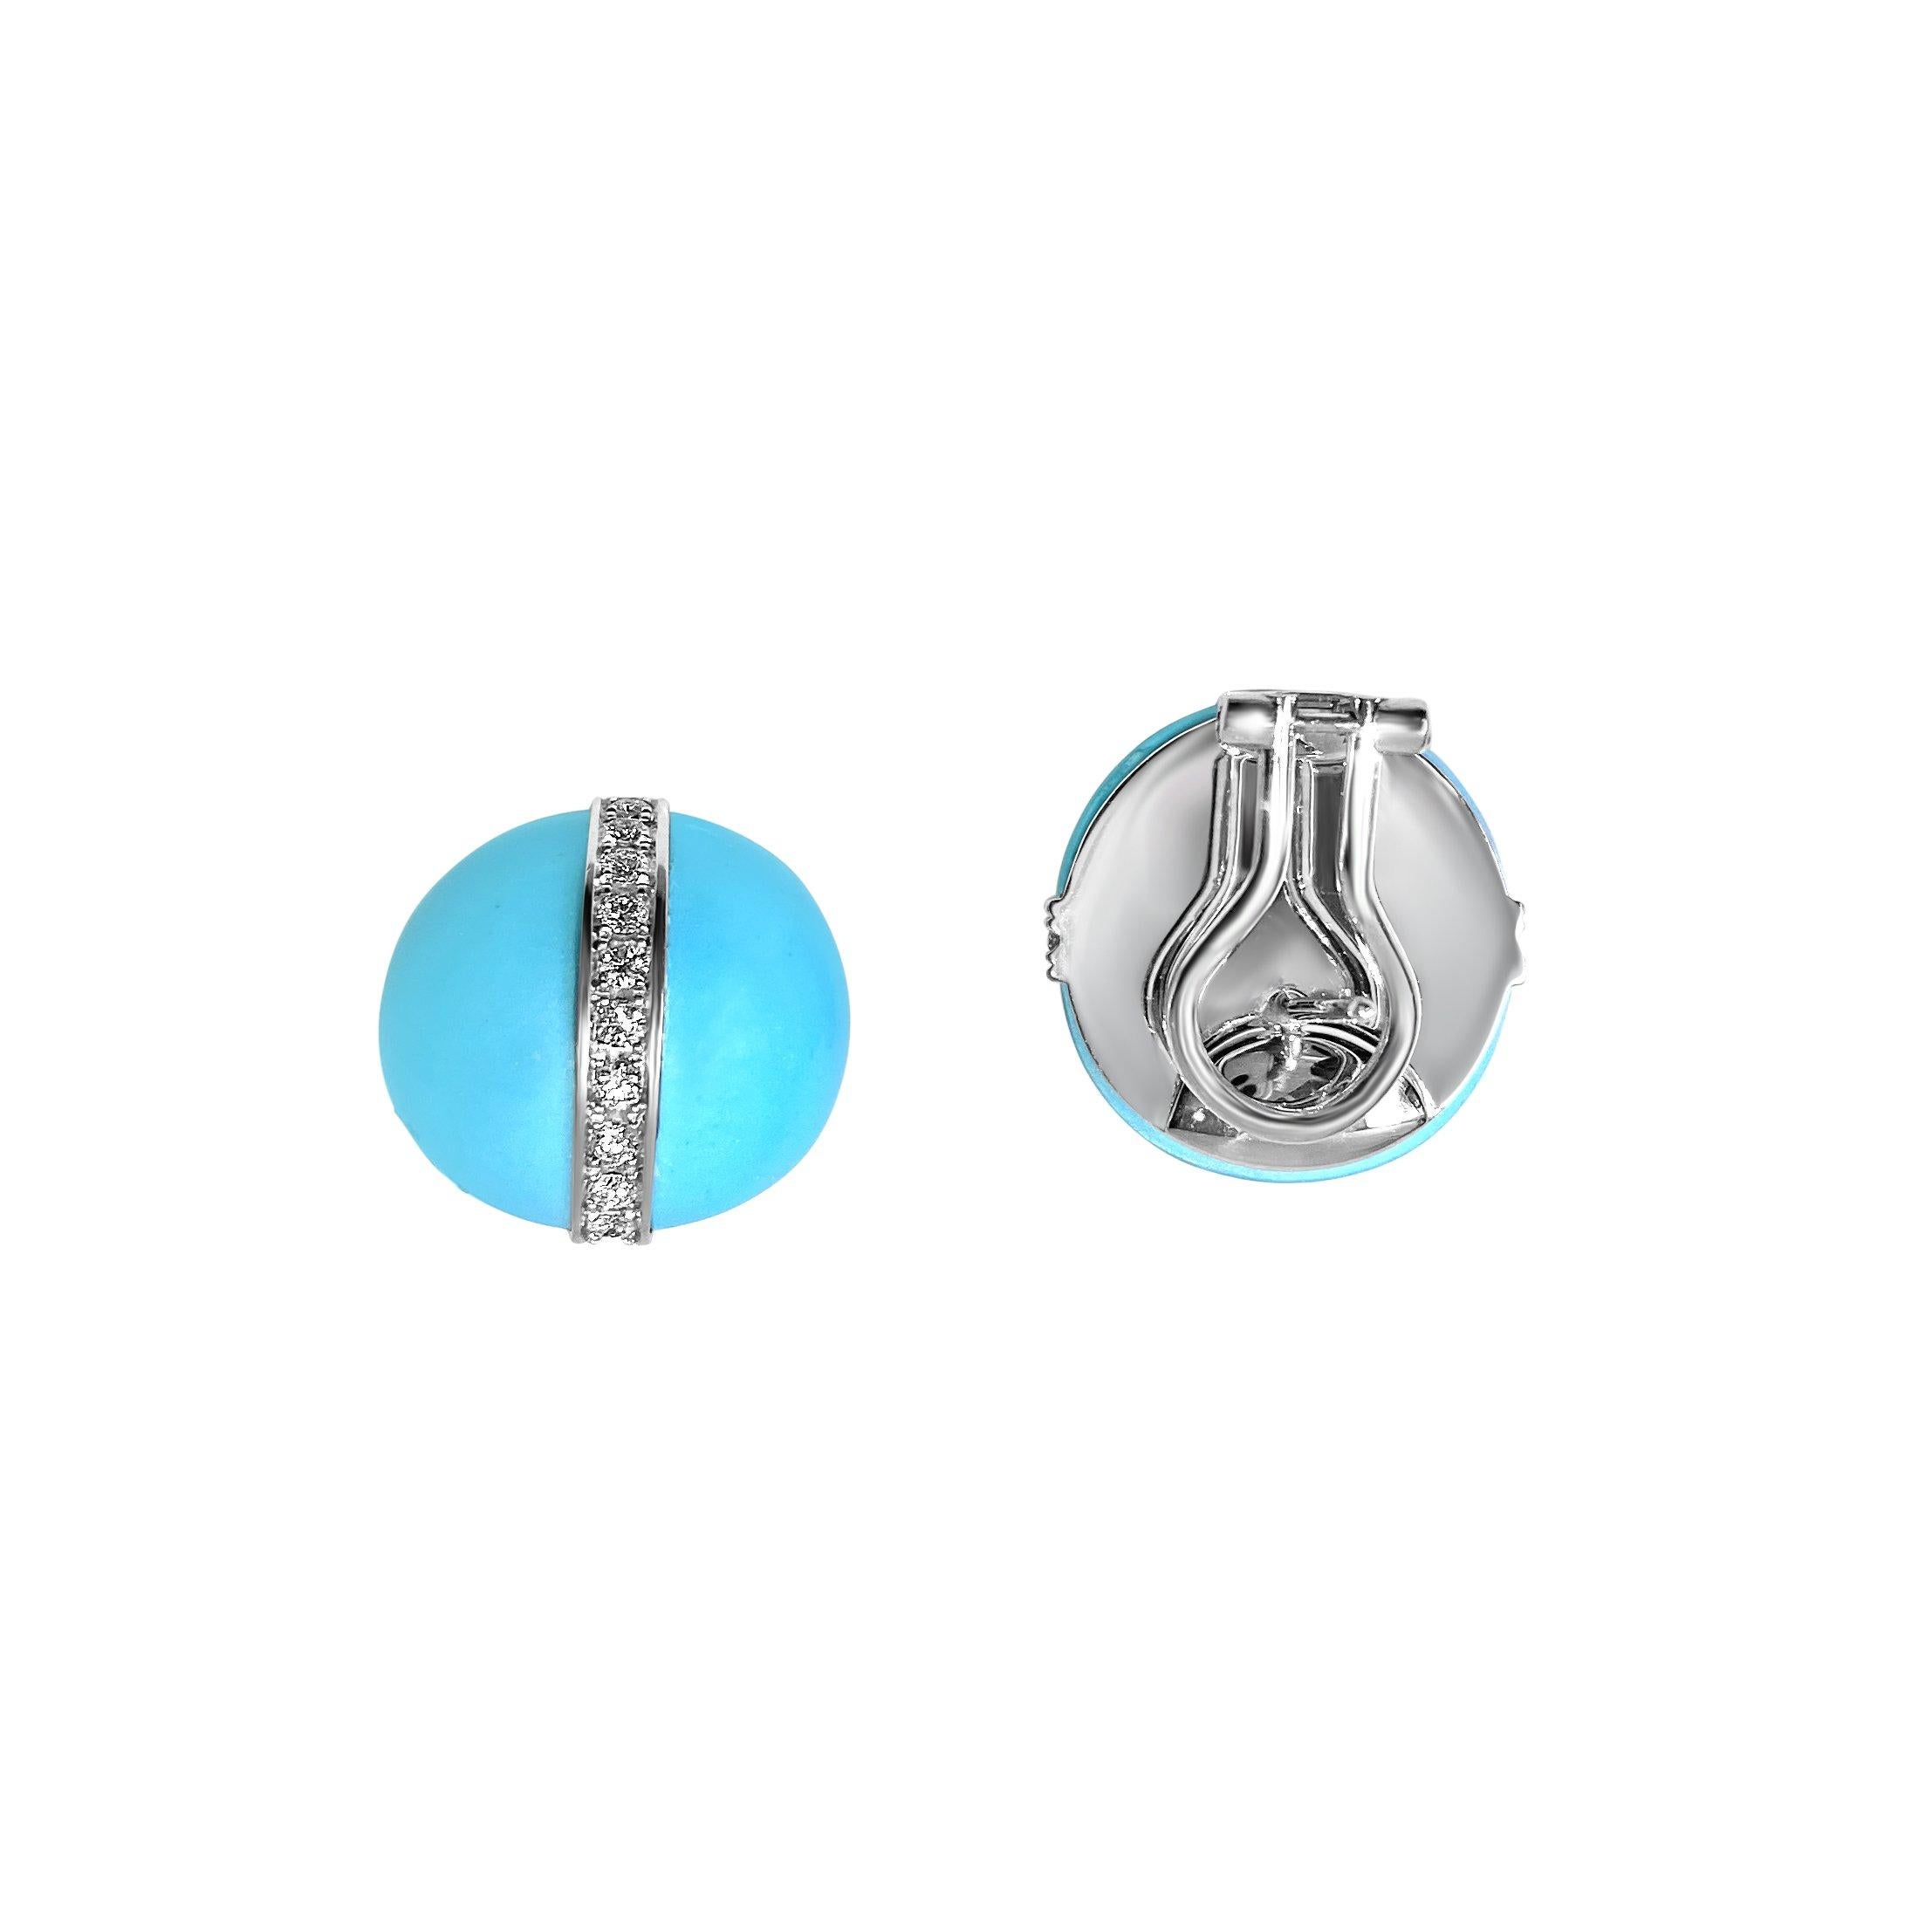 Matthia's & Claire Etrusca Collection Earrings: Elegant turquoise earrings set in 18kt white gold with pave diamond accent. Ultra-secure lever back. A matching necklace is available. 

Specifications:
- 18k gold and turquoise
- 11.50 grams
- 0.44